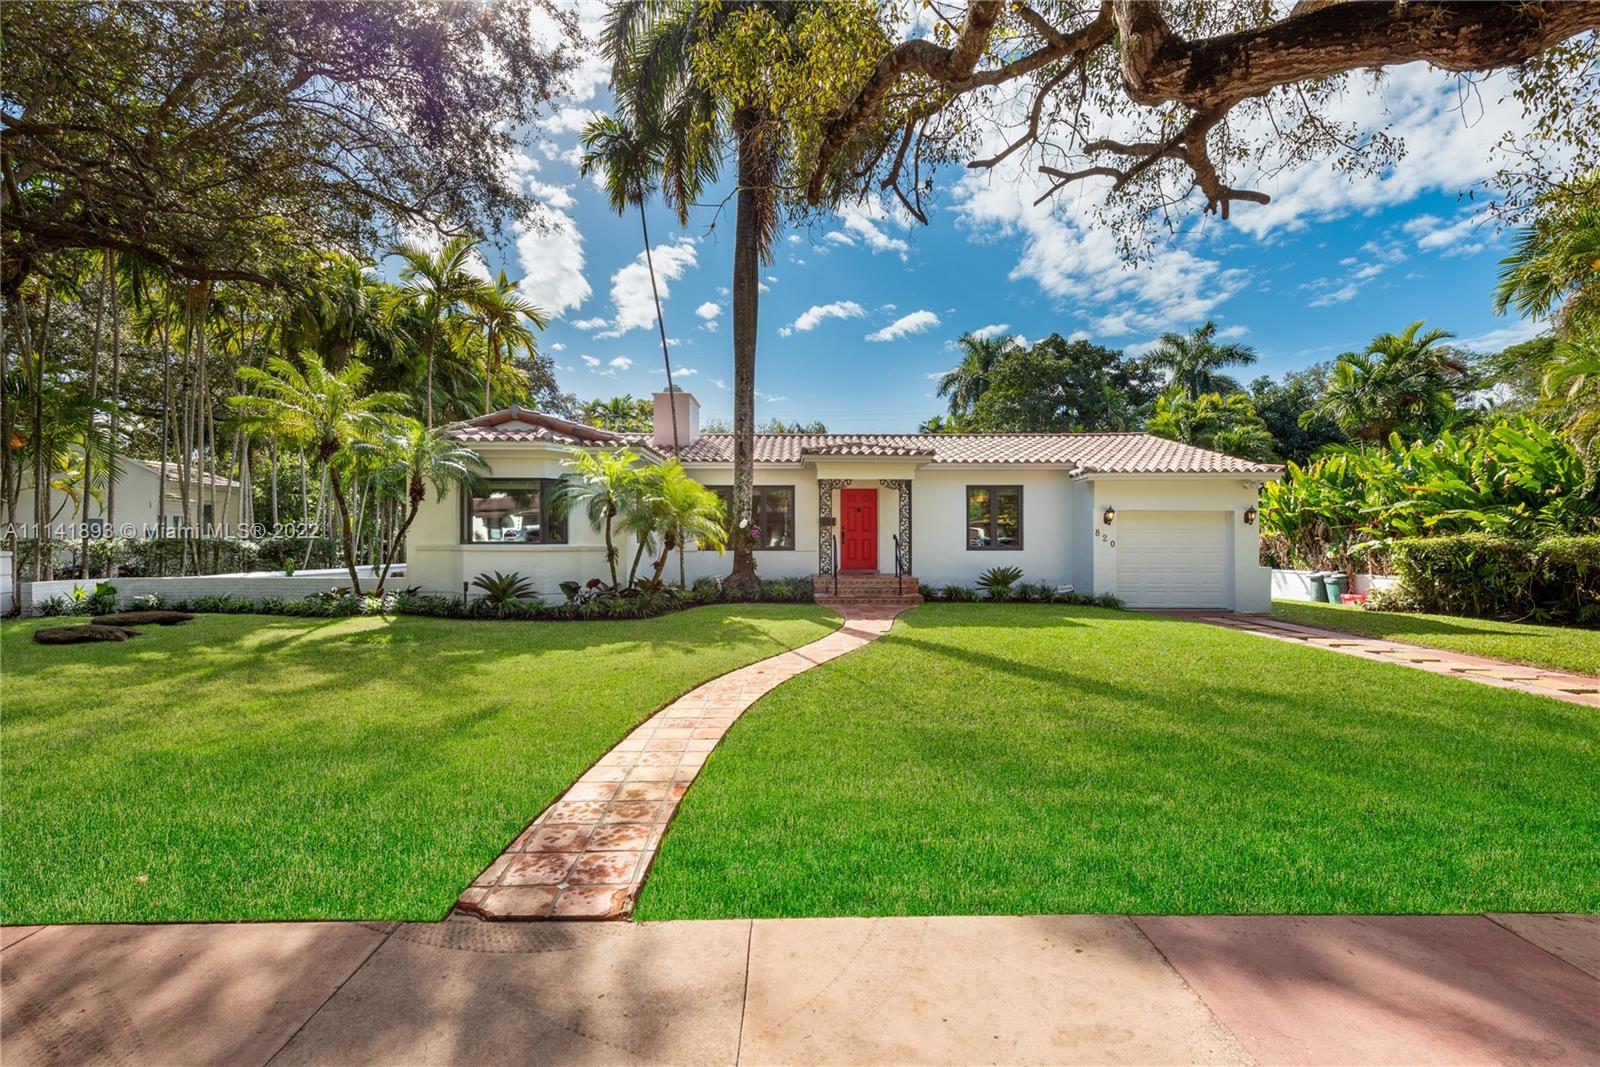 This spacious 4 bdrm/3.5 bath home is located on a quiet street south of Coral Way near the Biltmore Hotel & Venetian Pool. One of few homes on the market in this choice location. Was a 2/2 but major addition 12 yrs ago added a wing with a guest room/bath plus a huge master with voluminous ceiling, 2 large walk-in closets, luxurious bath with a separate tub/spa, shower, double sinks, and lots of light. 3038 adj. sq. ft on a 13,500 lot. Owner also has plans drawn for the second phase addition of a garage with guest quarters above and a pool in the 5600 ft space in the back yard. Flexible closing. Home is very well priced & will sell above list price. Allied inspections are available. Ygrene was used for impact windows and new roof in 2015; on tax bill. Offers accepted until Thurs. 1/20/22.